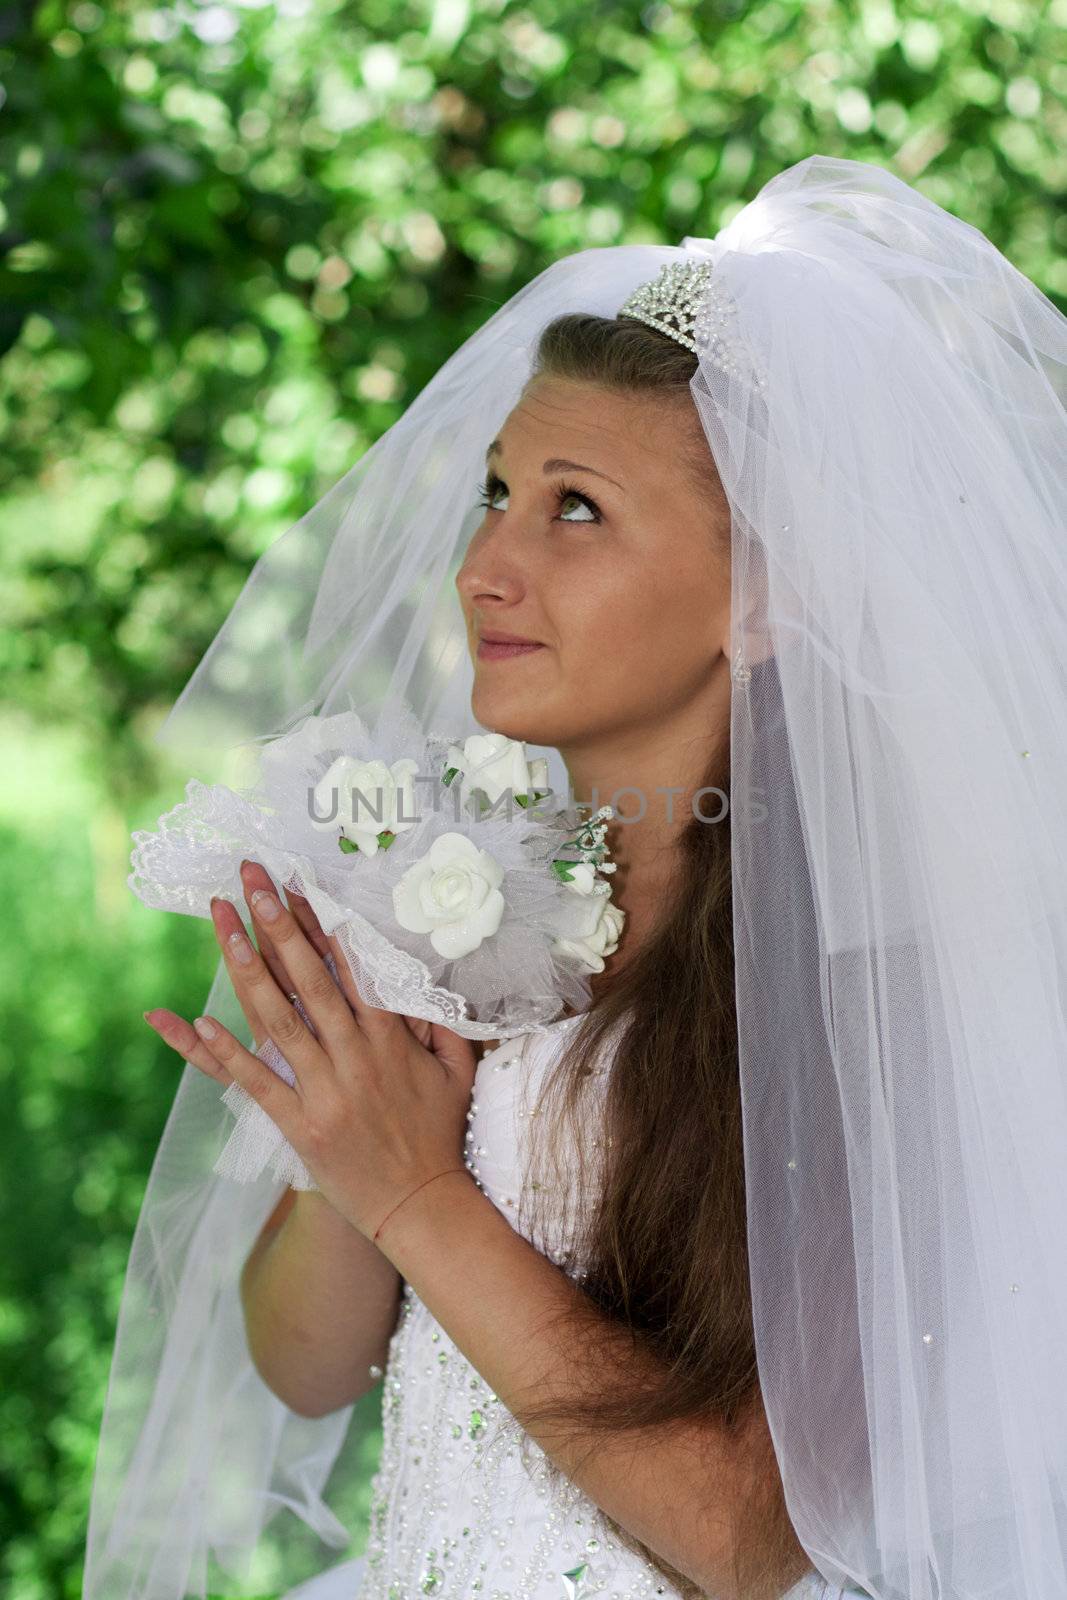 The bride with a bouquet on a green background